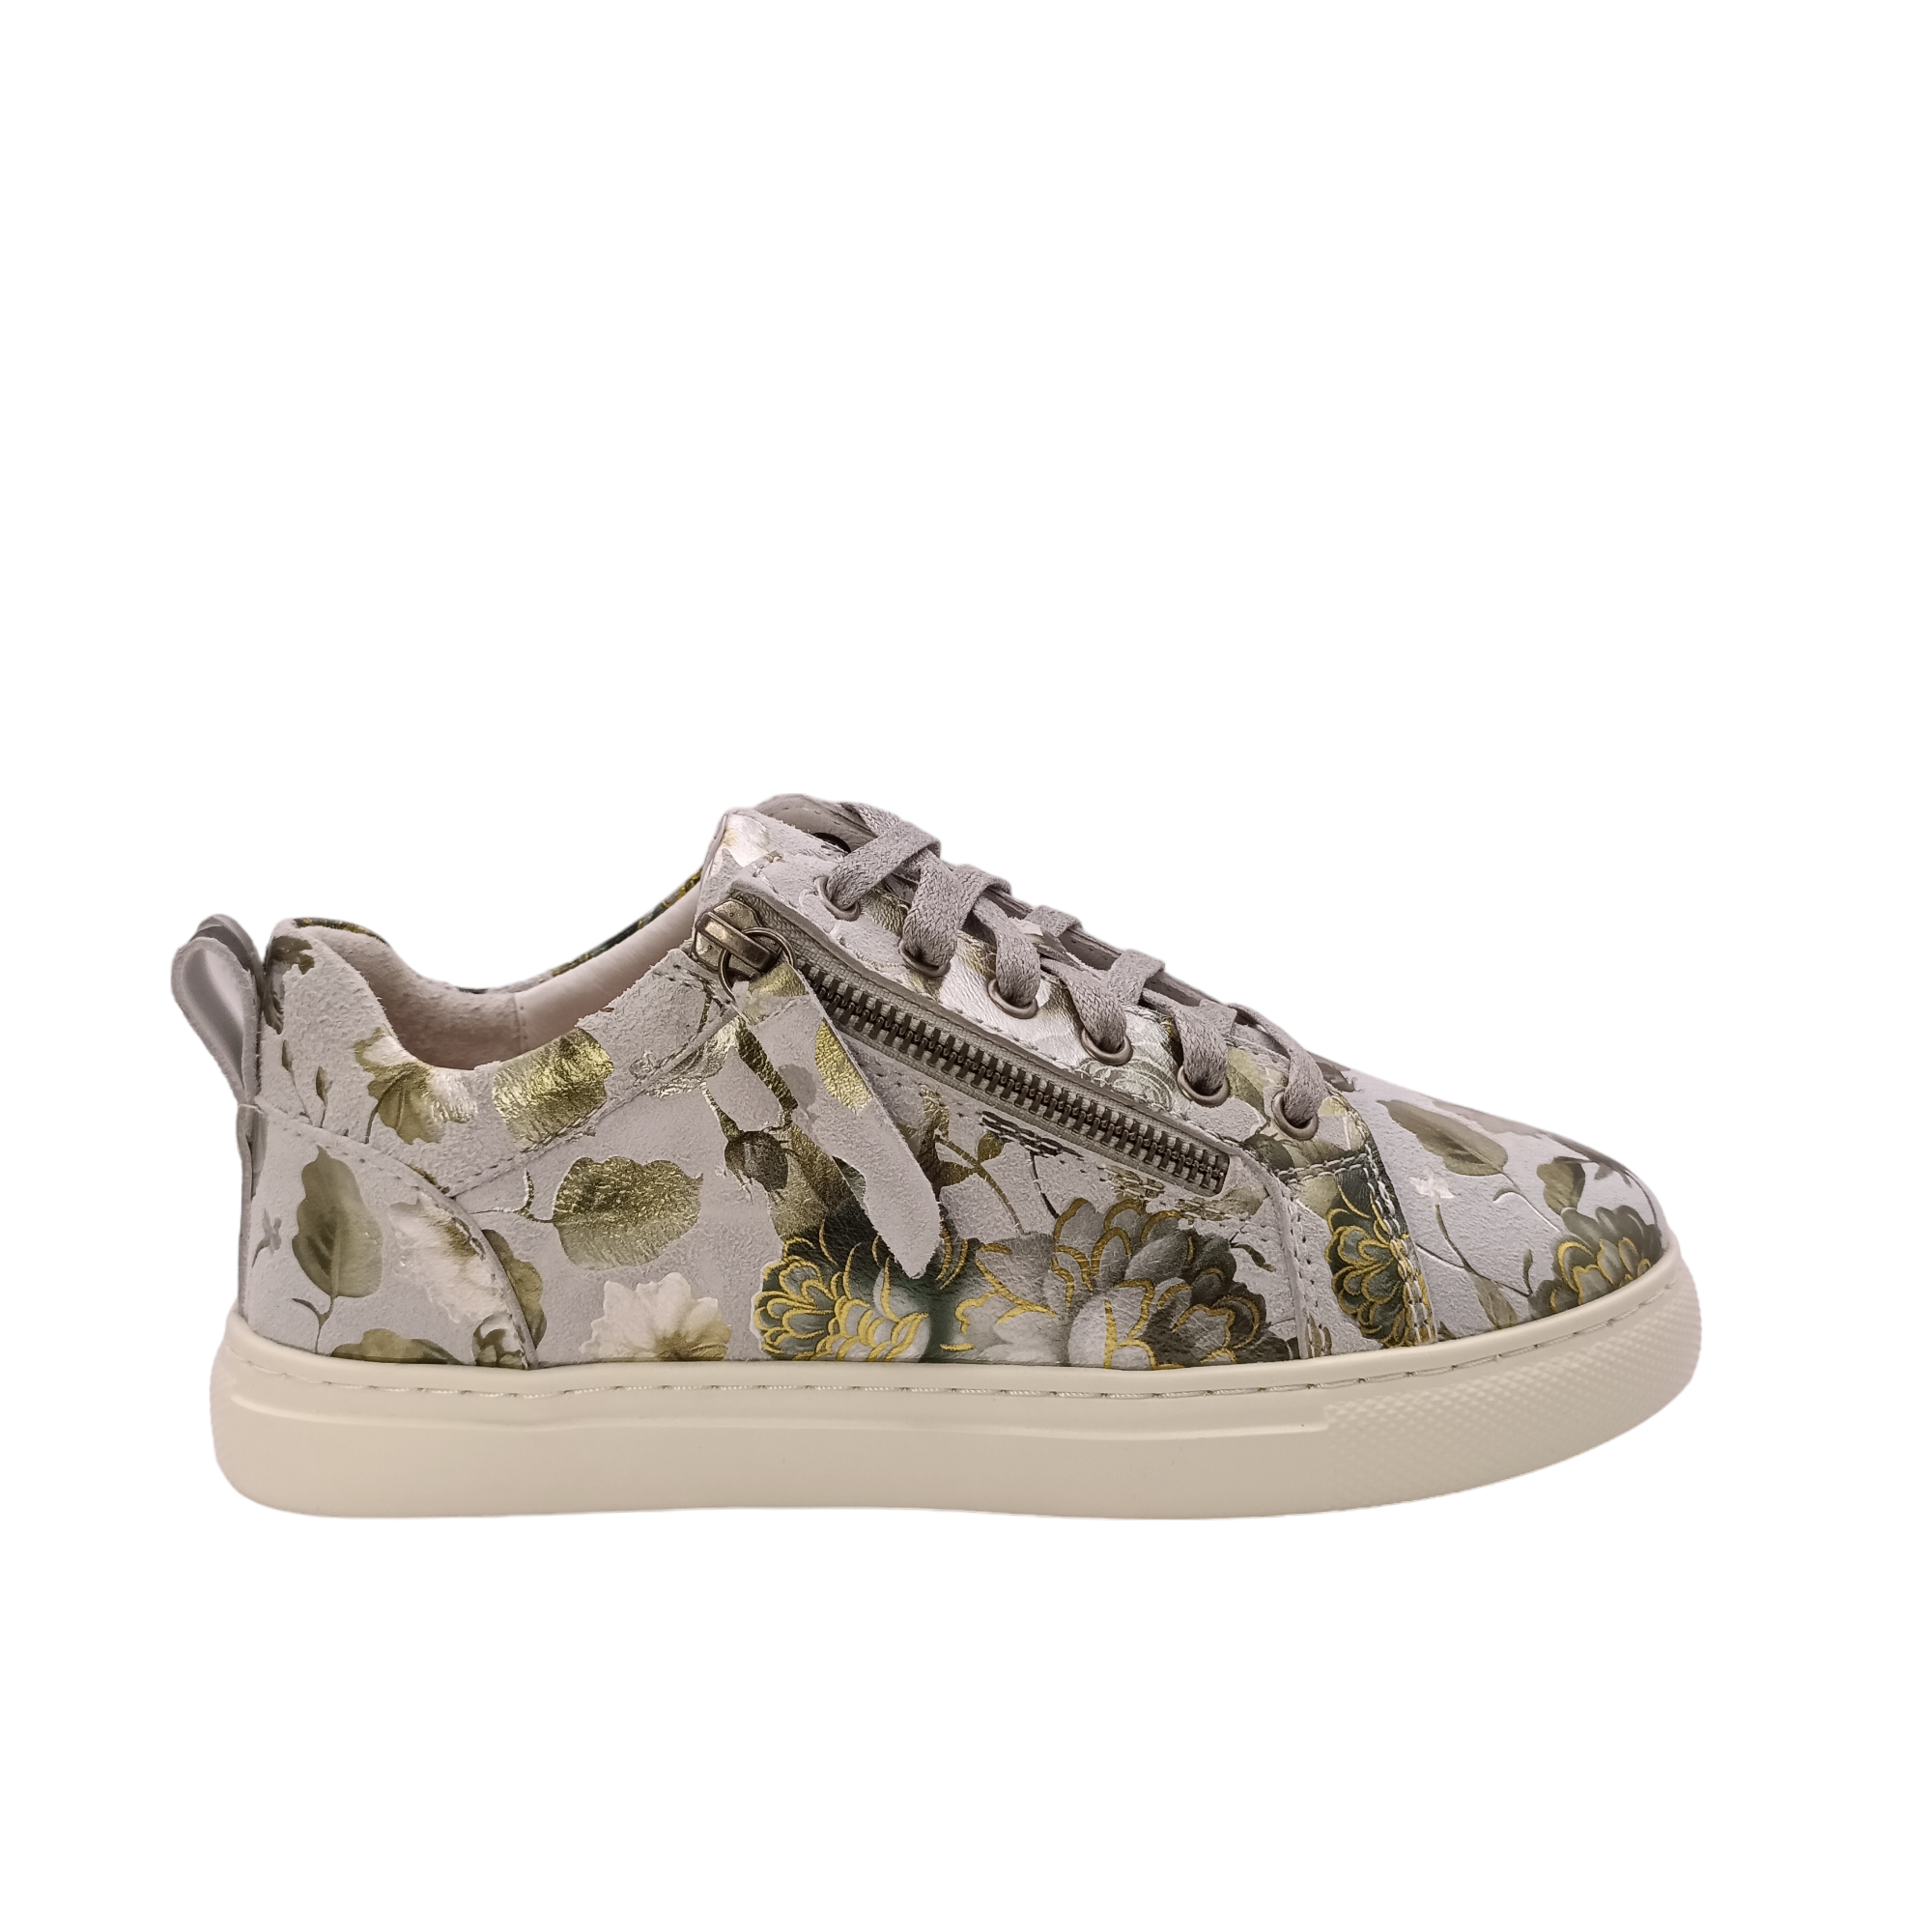 Silver sneaker with side zip. Leather printed with green and gold patterned floral design. Step into style and comfort with the stunning Cassini shoes. Featuring a unique floral and metallic pattern, these women&#39;s shoes offer the perfect blend of fashion and function. These&amp;nbsp;Cassini shoes are sure to become your new go-to for comfortable style